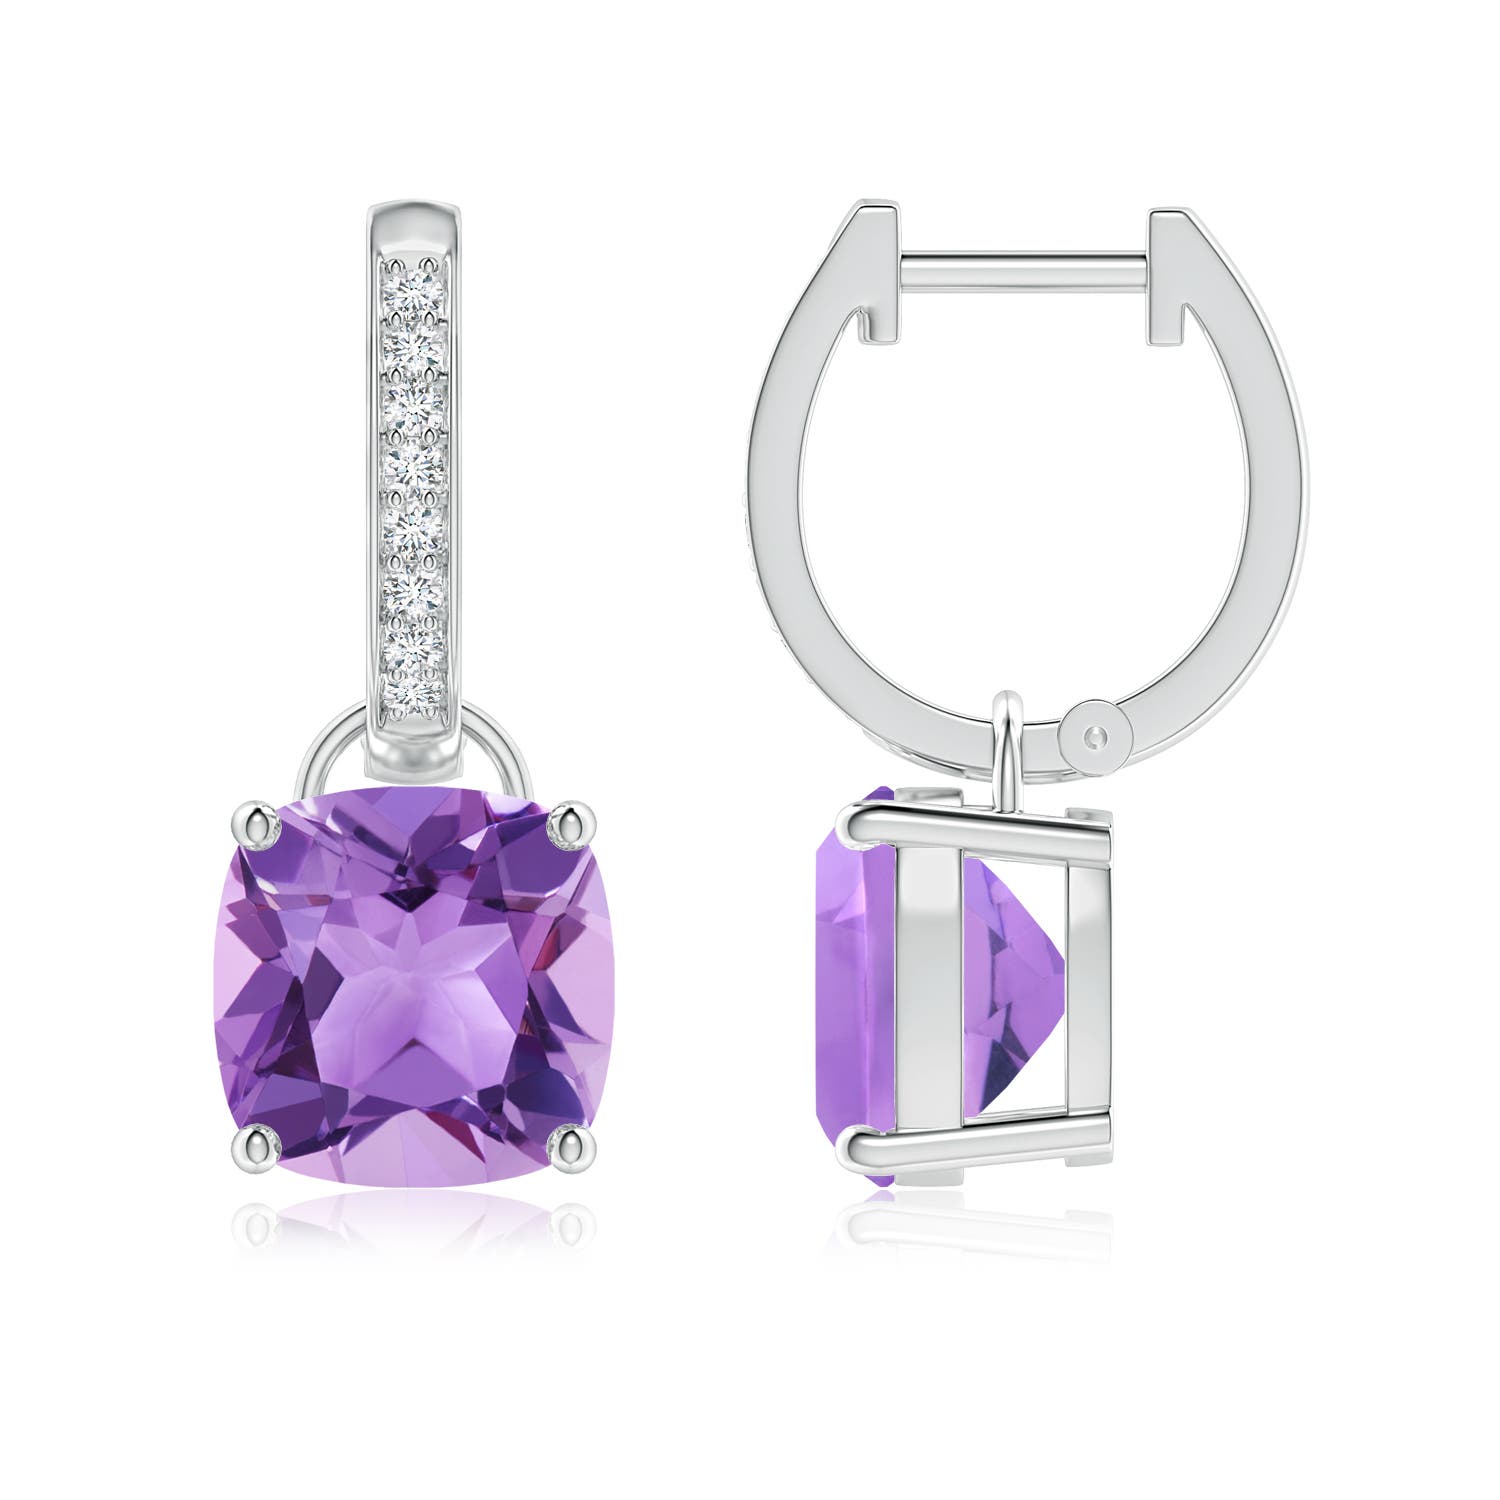 A - Amethyst / 4.53 CT / 14 KT White Gold